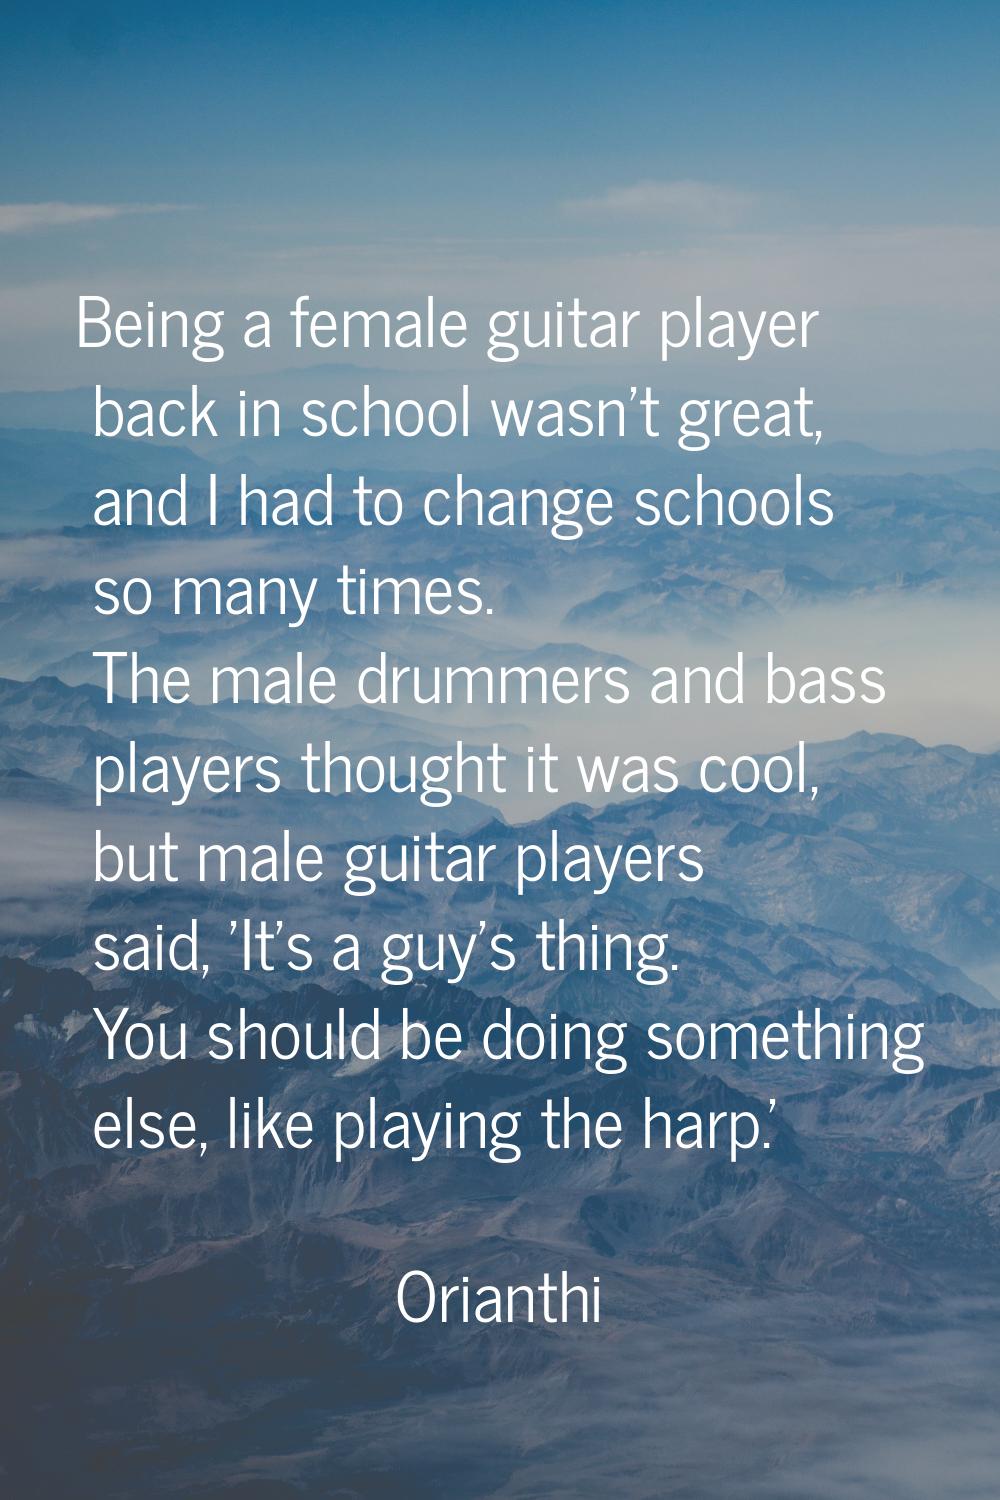 Being a female guitar player back in school wasn't great, and I had to change schools so many times